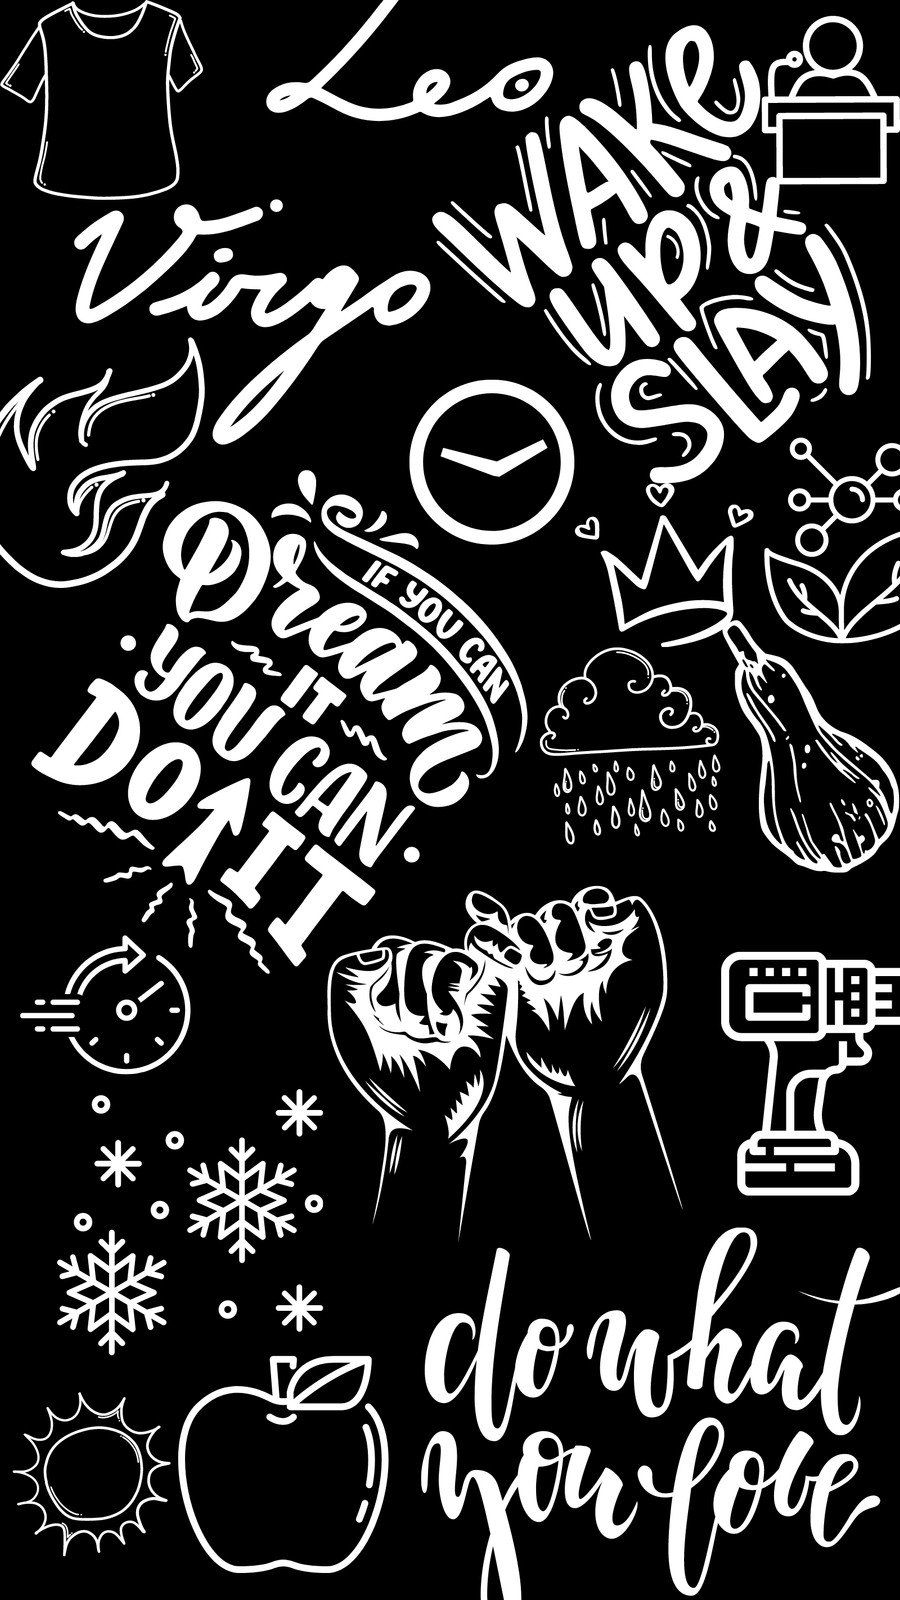 Black and white wallpaper with motivational quotes and drawings. - Virgo